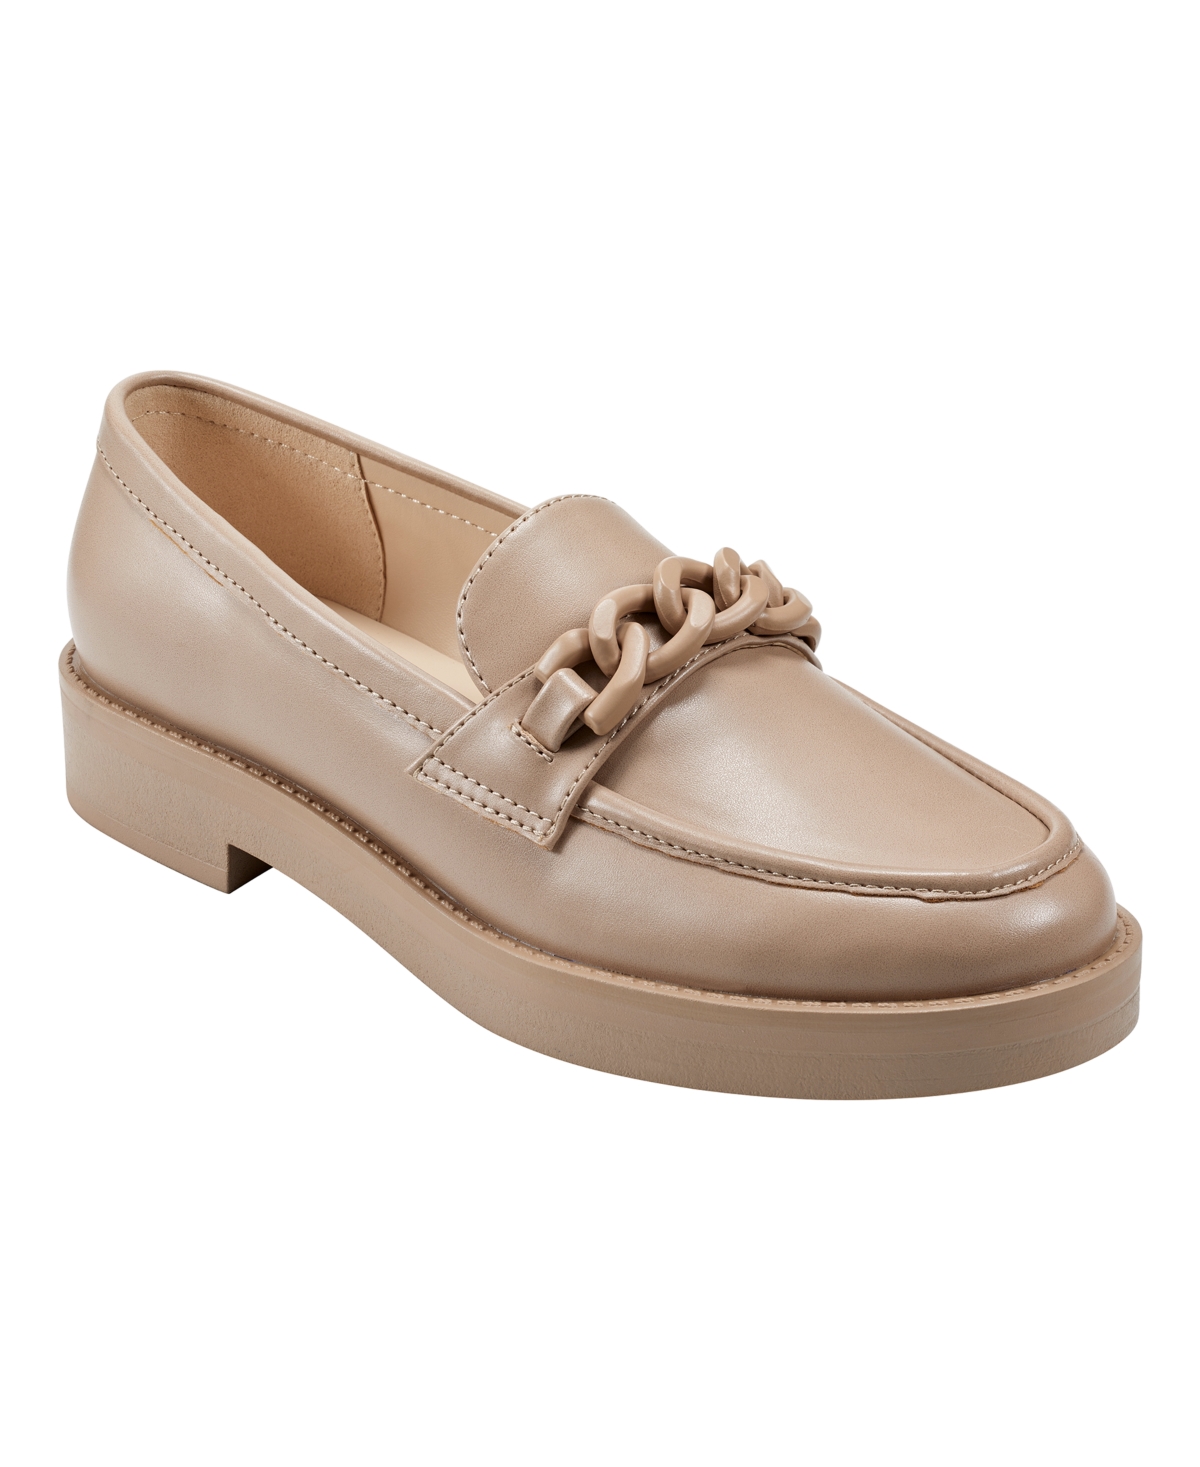 Women's Babbea Slip-On Almond Toe Casual Loafers - Light Natural